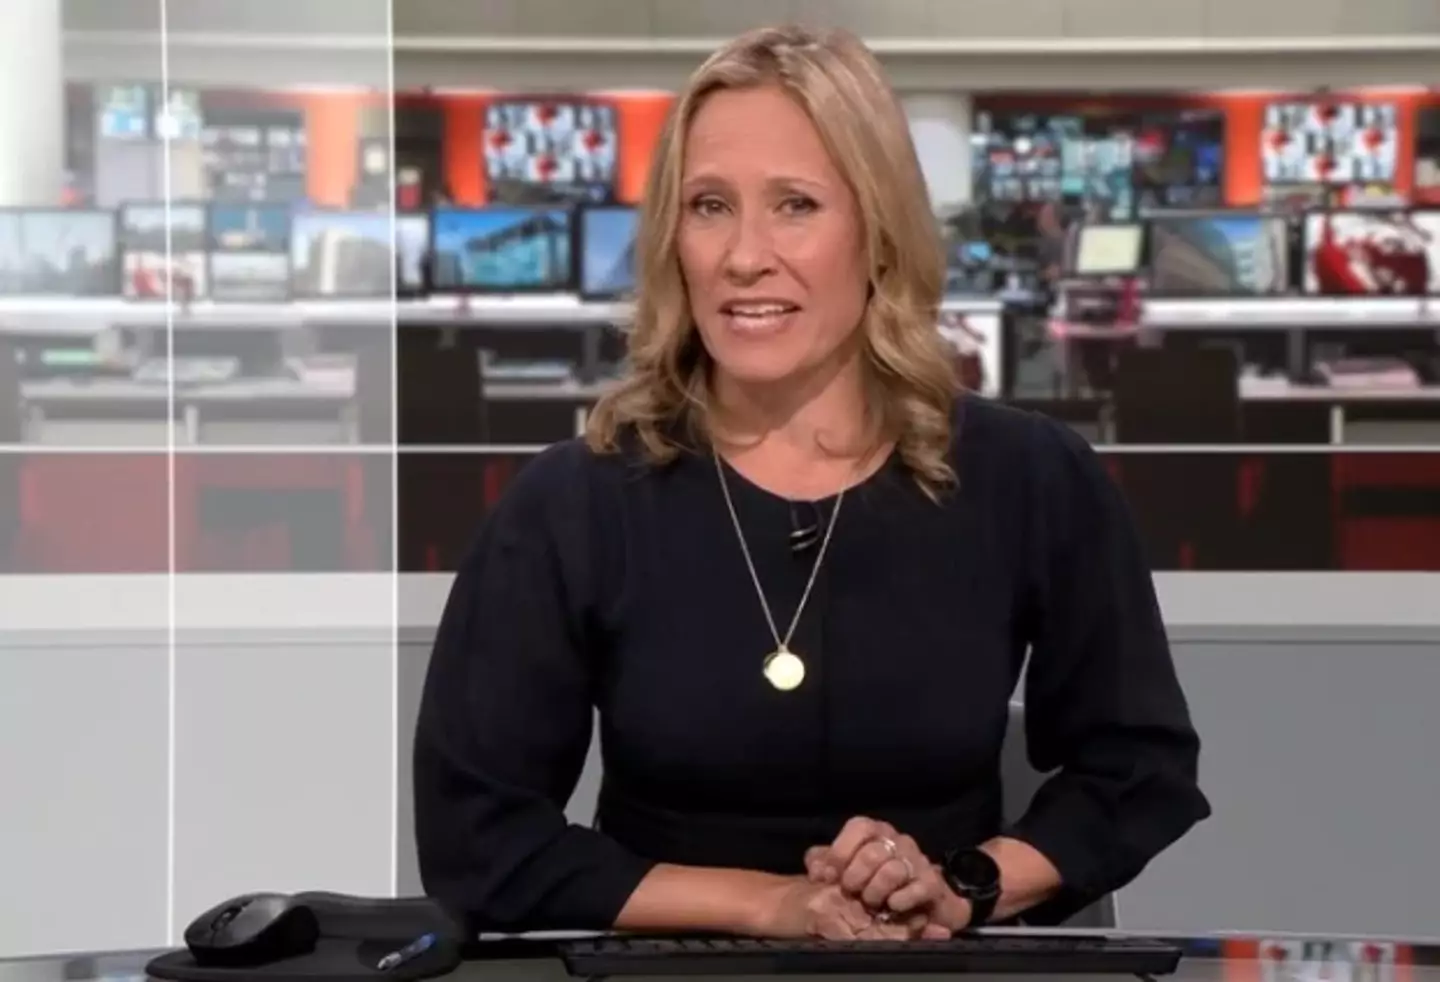 BBC presenter Sophie Raworth shared George Alagiah’s last wish before his death.